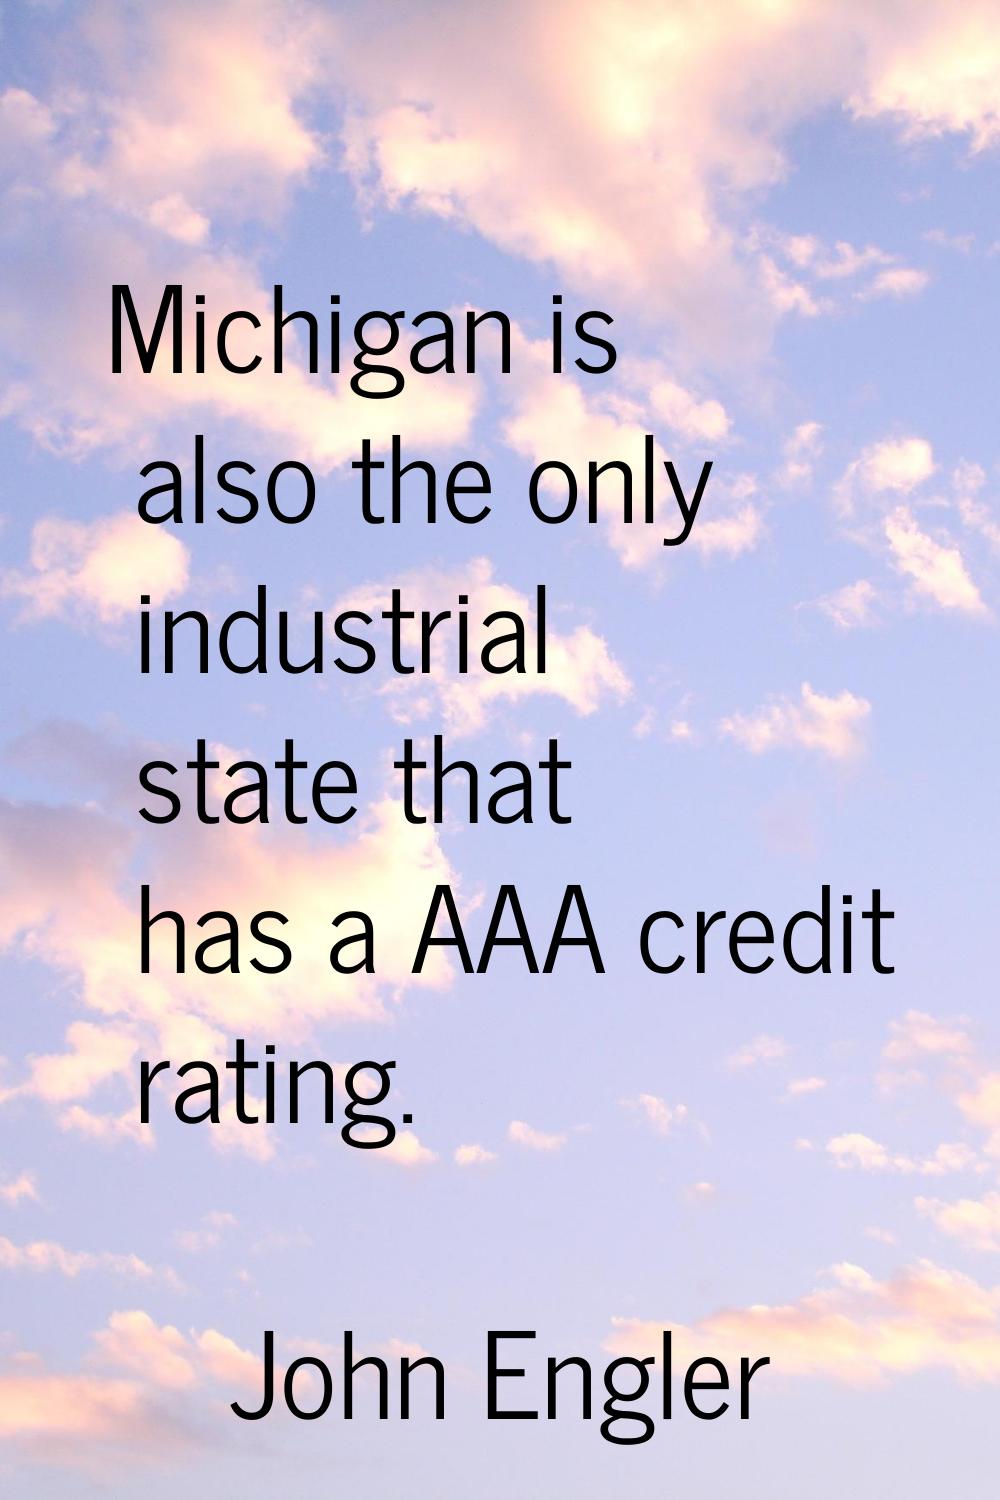 Michigan is also the only industrial state that has a AAA credit rating.